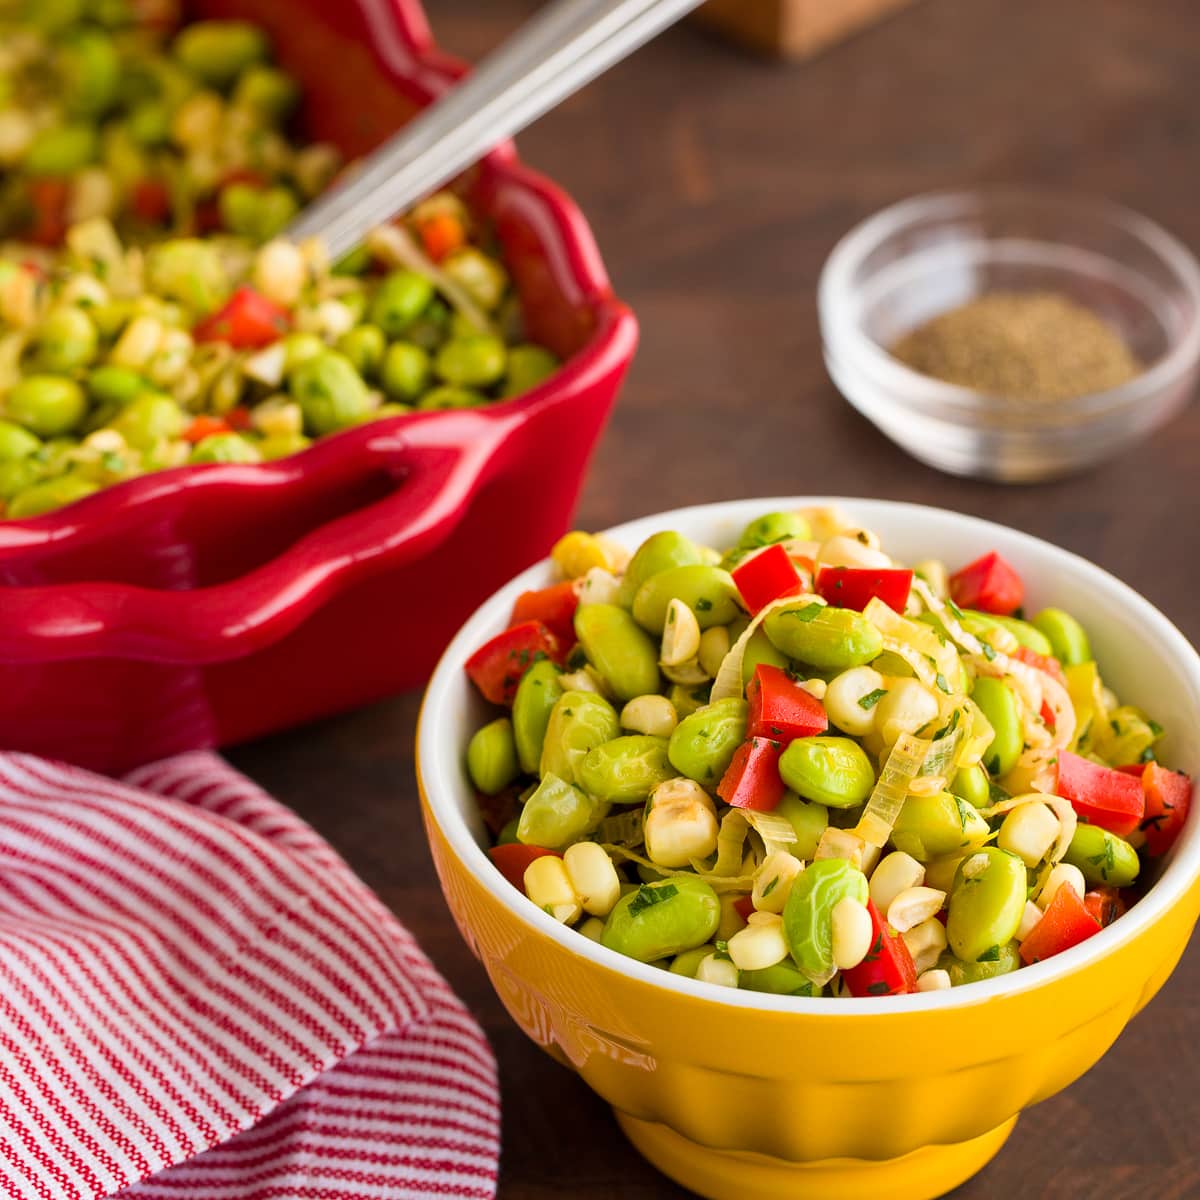 Colorful edamame succotash in yellow bowls on a wood table.